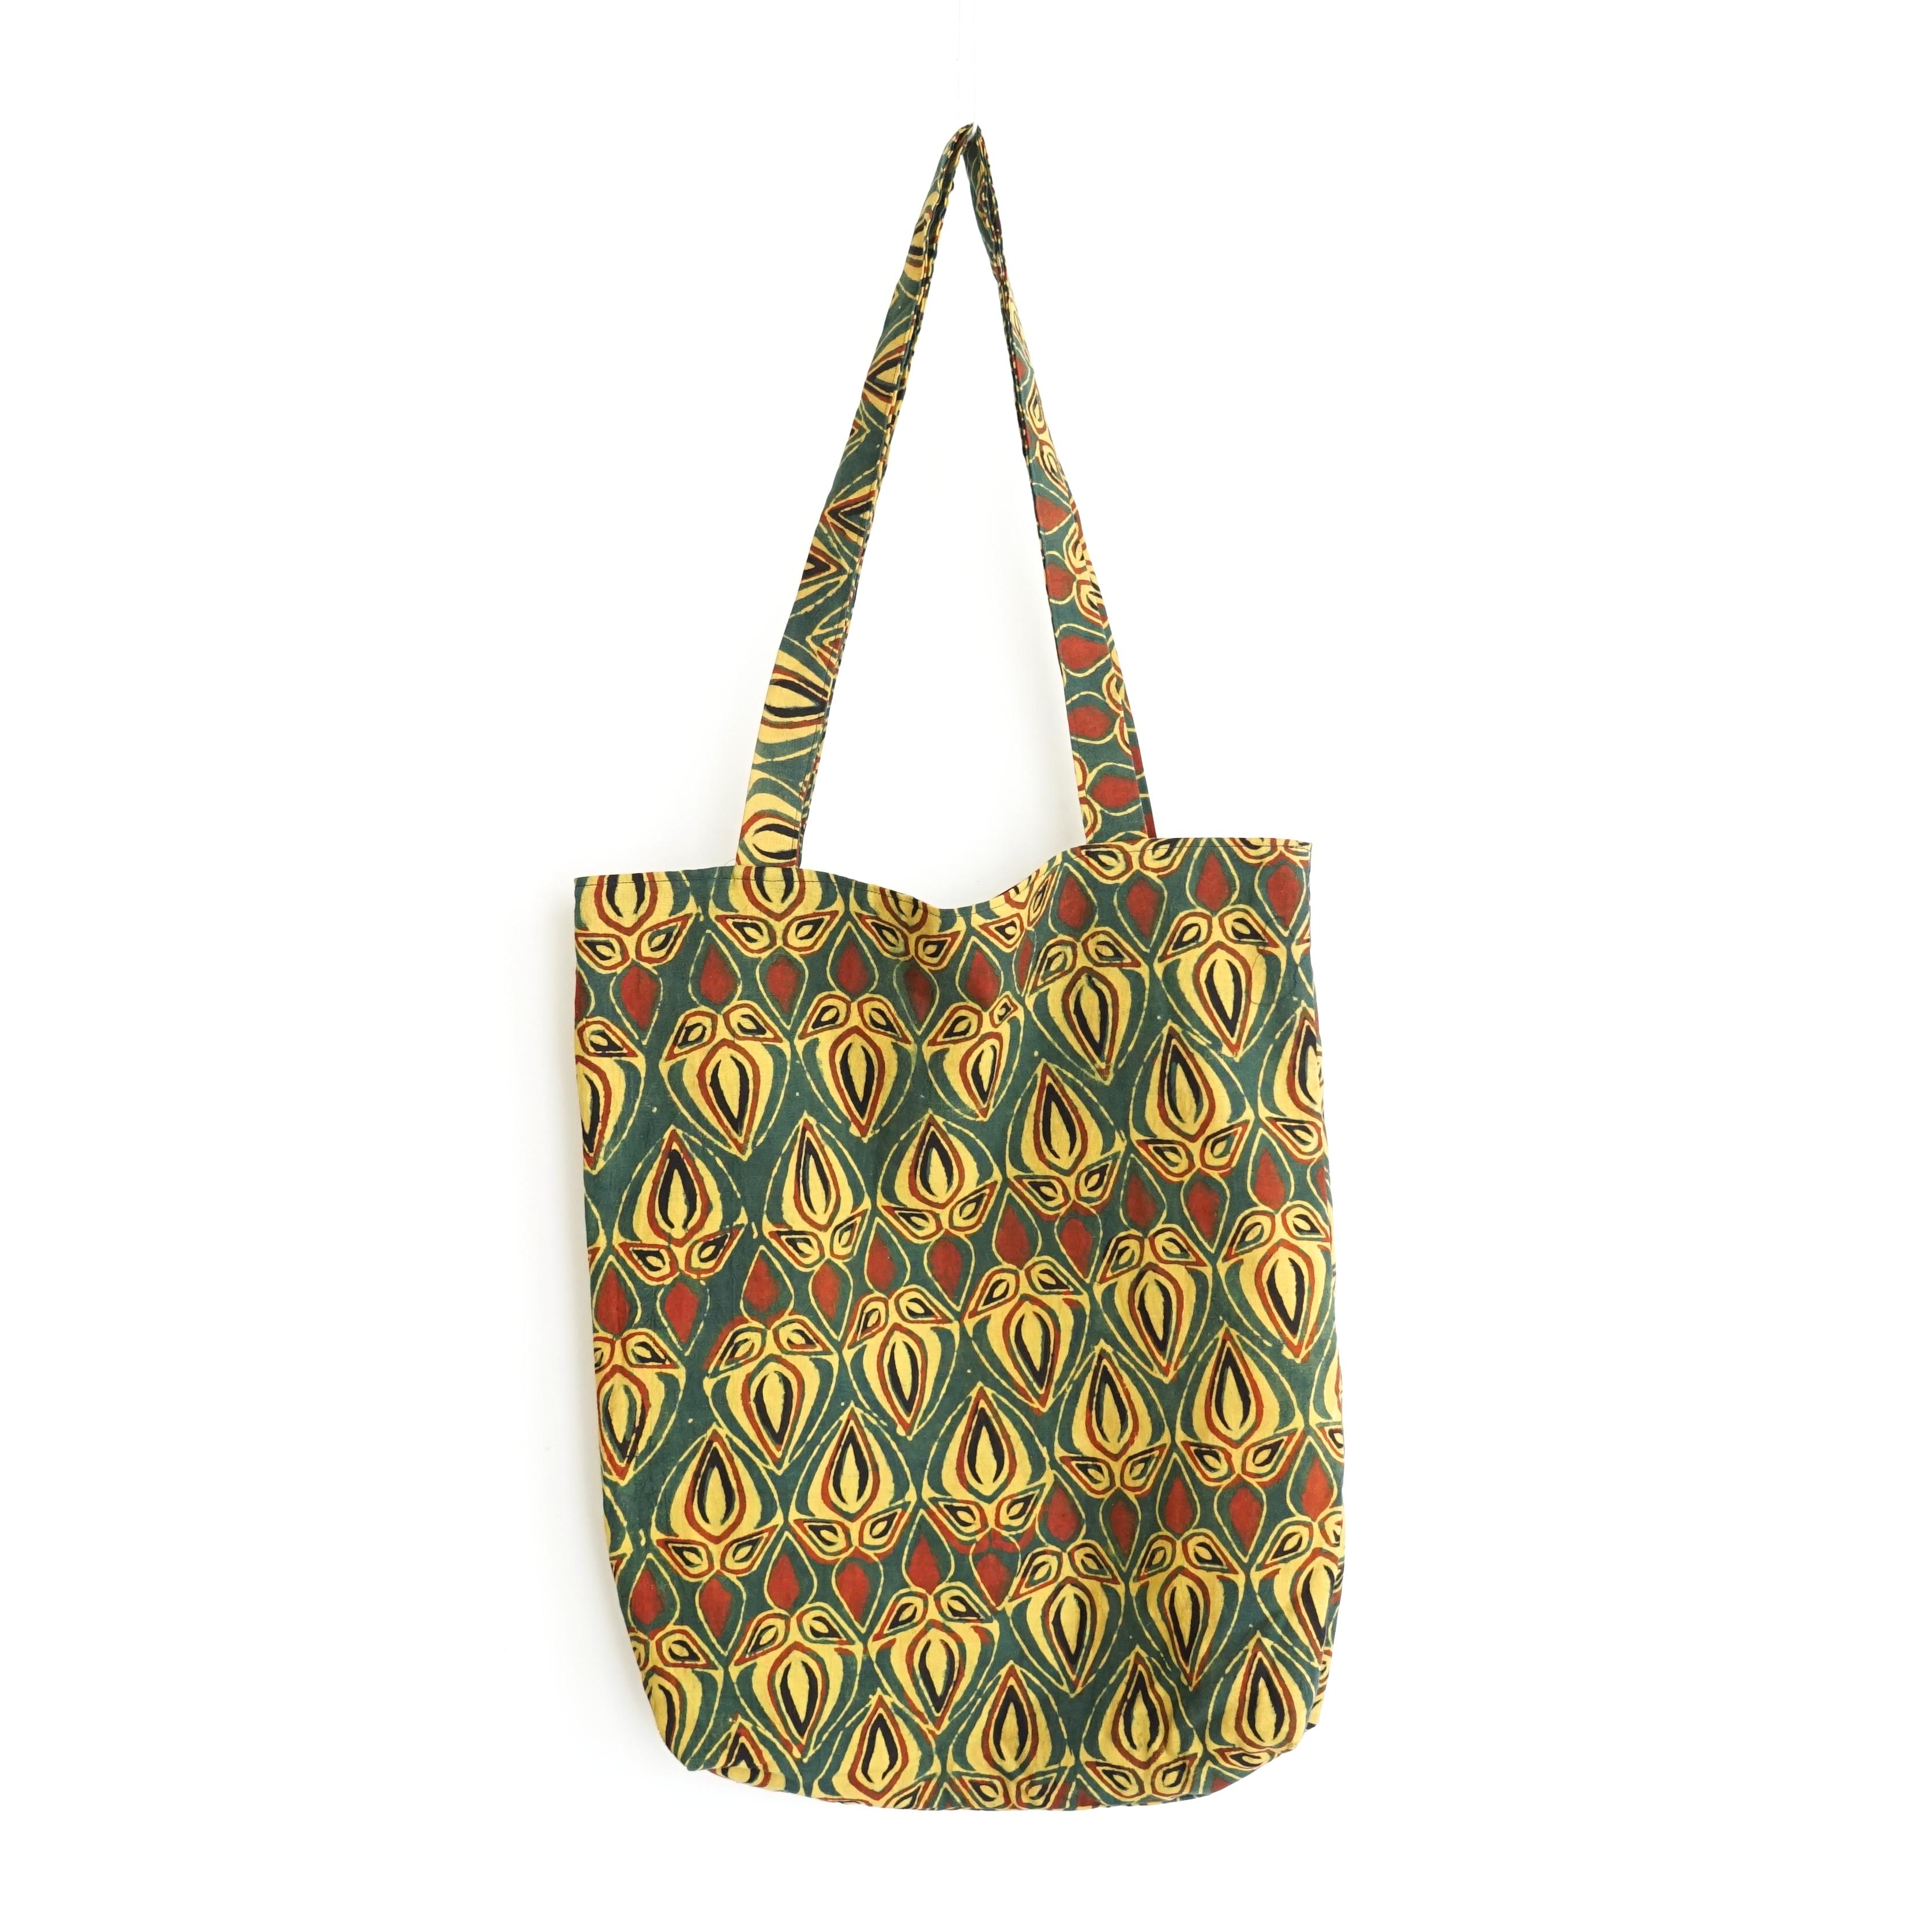 block printed cotton tote bag, green, yellow red bud, natural dye, lined with black cotton, closed